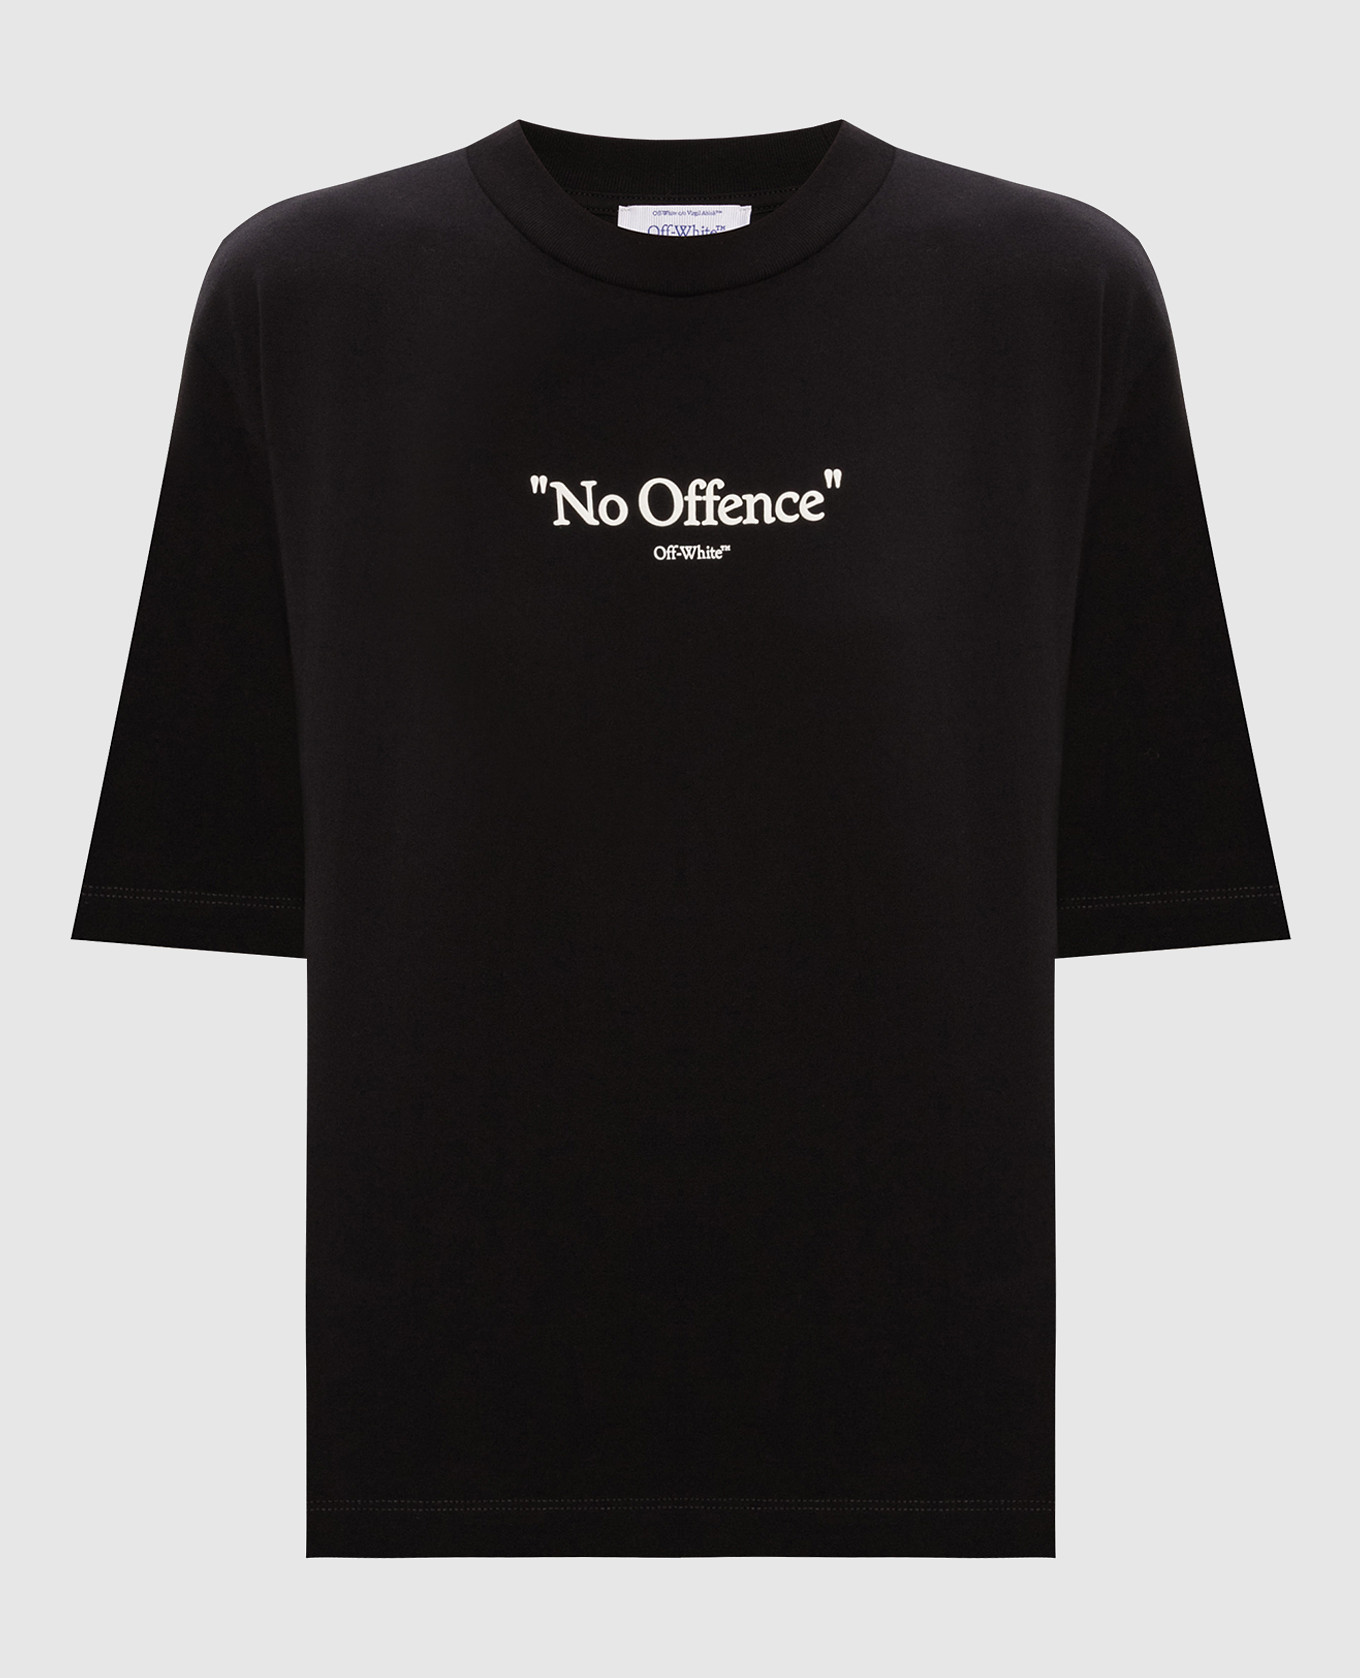 Black t-shirt with a contrasting textured print